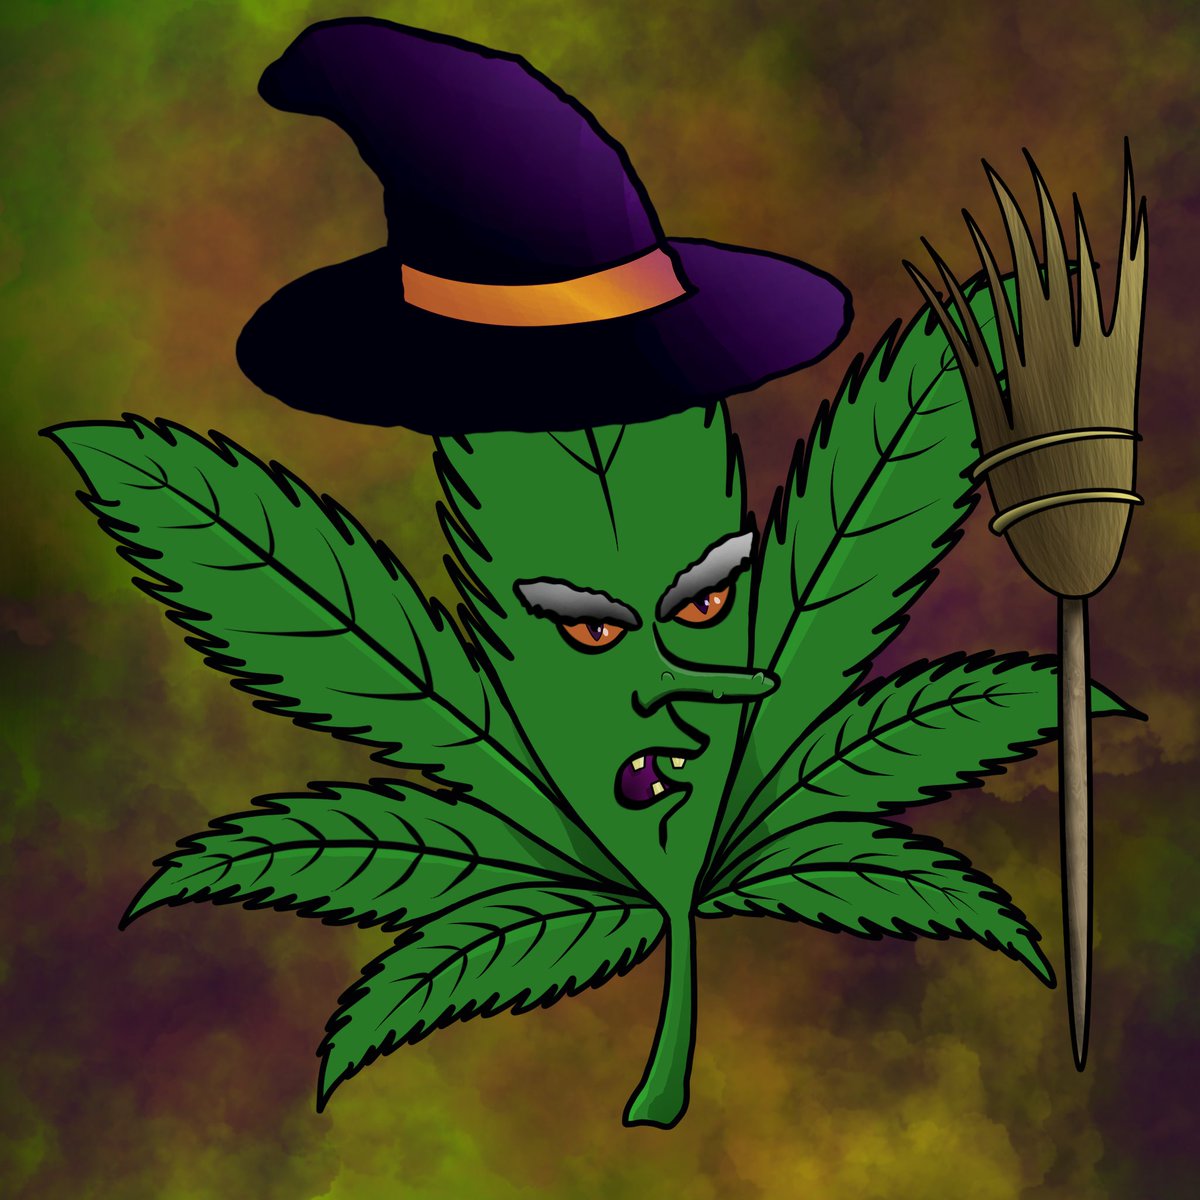 Gifted “Hocus Pocus, Roll Us Smoke Us” to @butter_cutie for “getting an AnthroWeed tatted” 😂✊

#weednft #danknfts #trippynft #witchart #witchesart #witchdrawing #pinupart #pinuptattoo #pinupnft #womennft #nftwomen #nftgirls #nftwoman #asstat #asstattoo #weedtattoo #420tattoo